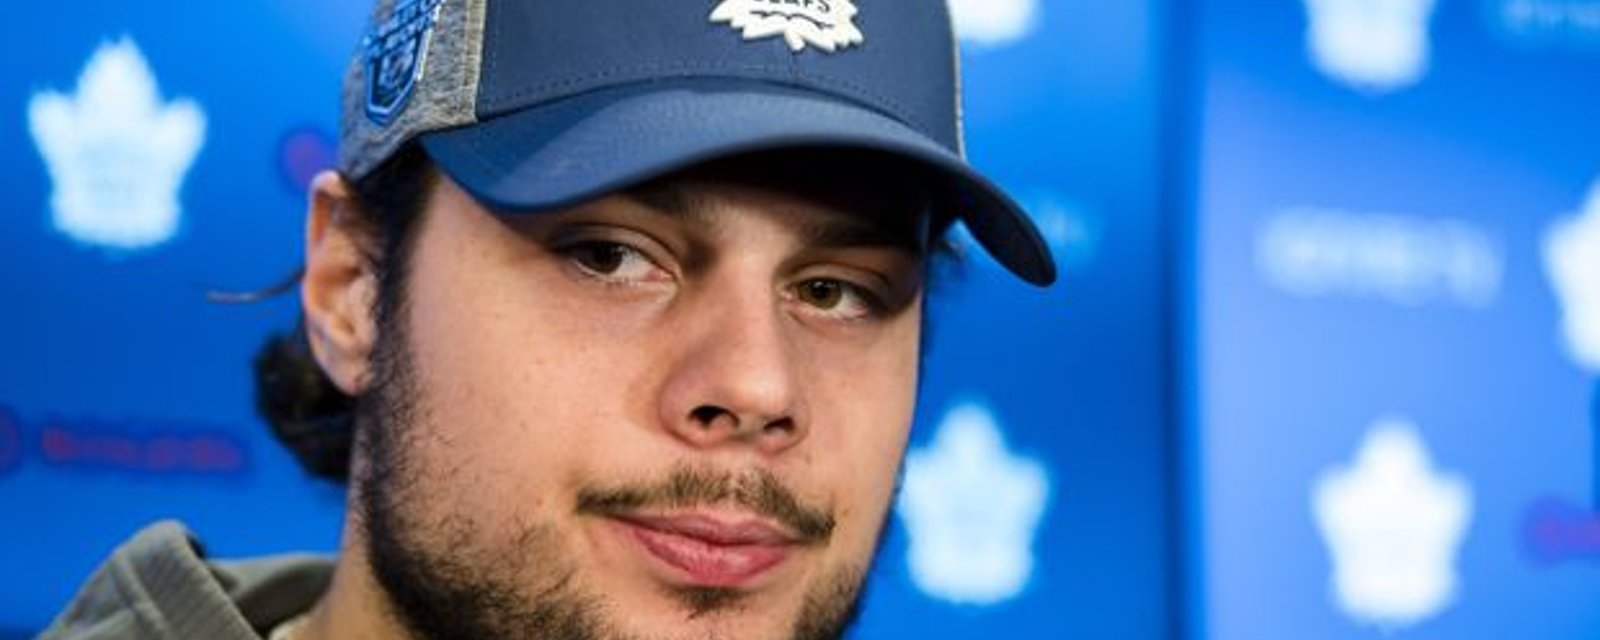 Matthews turned down this Leafs’ offer before they finally got it right